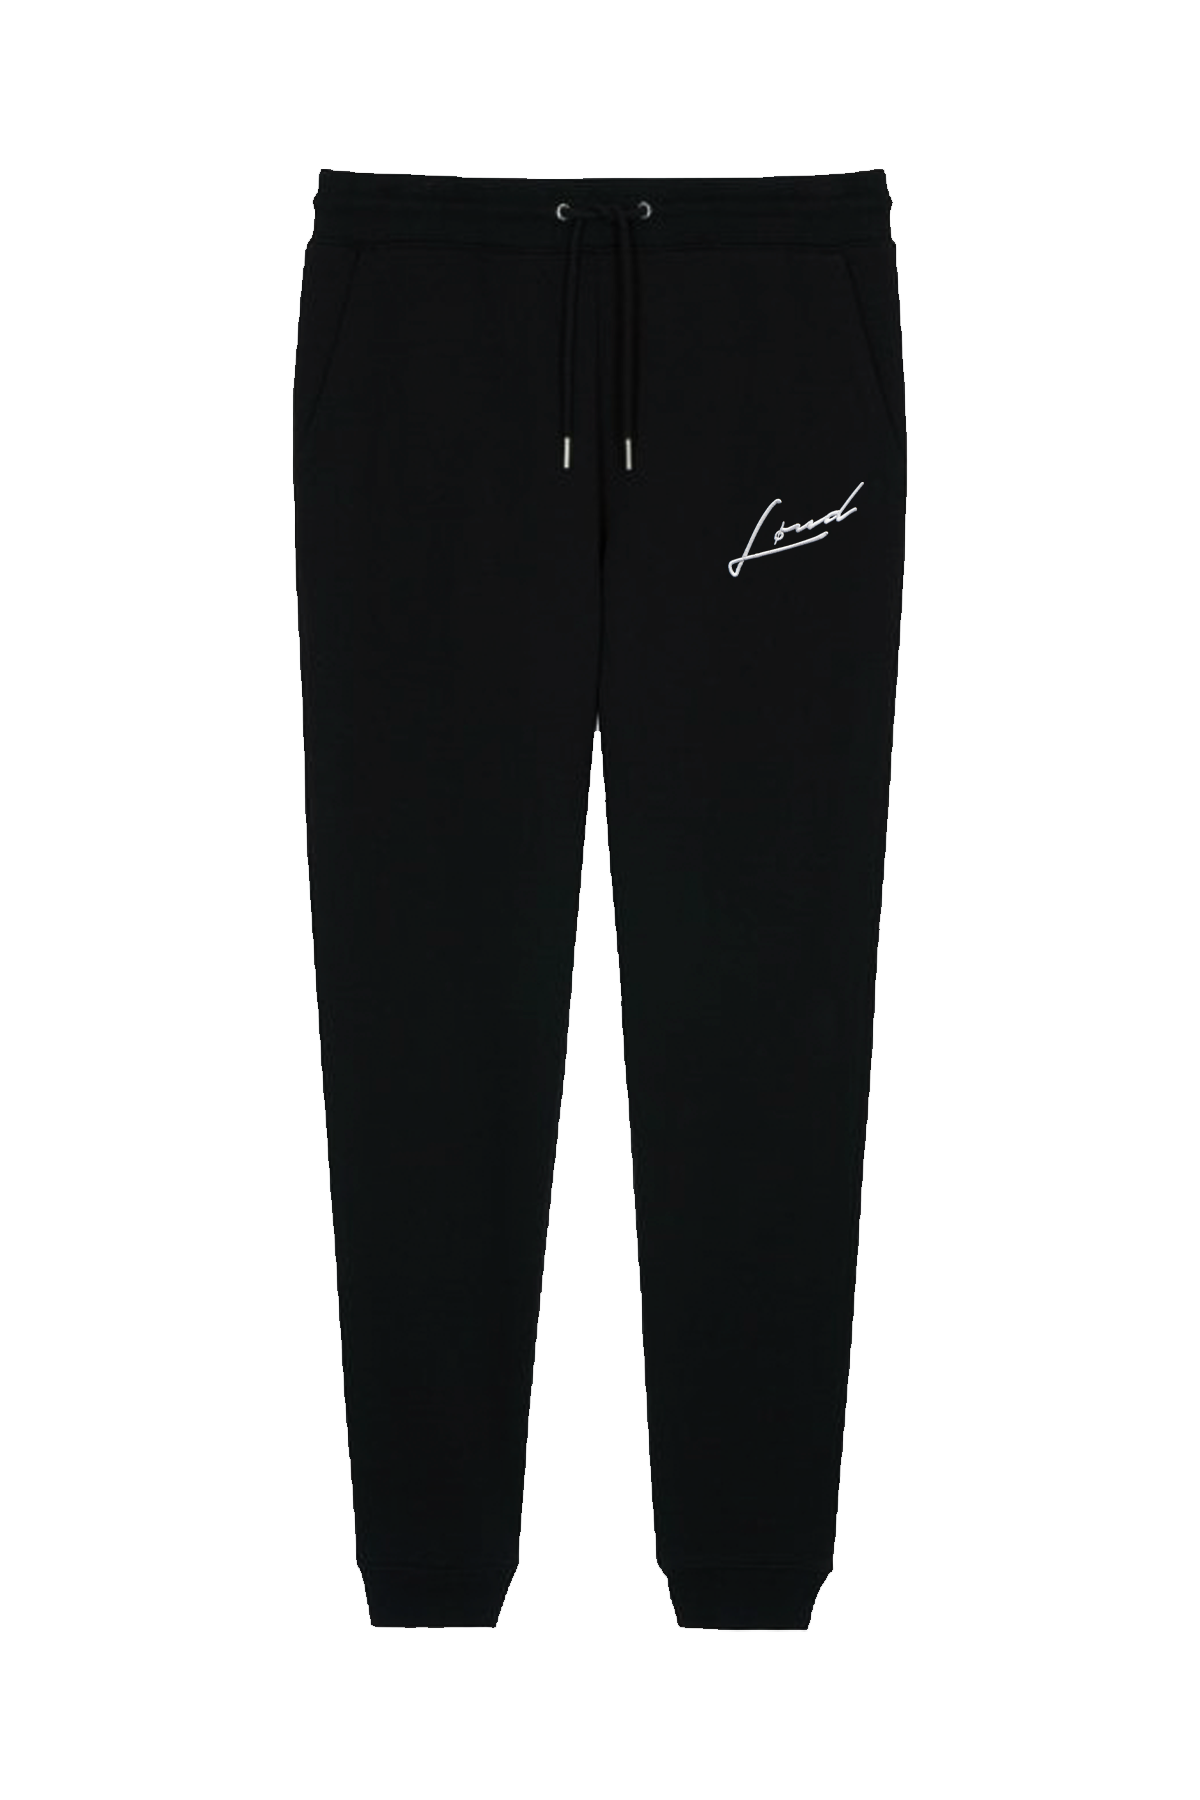 Loud Signature Embroidered Joggers - Live Look Loud